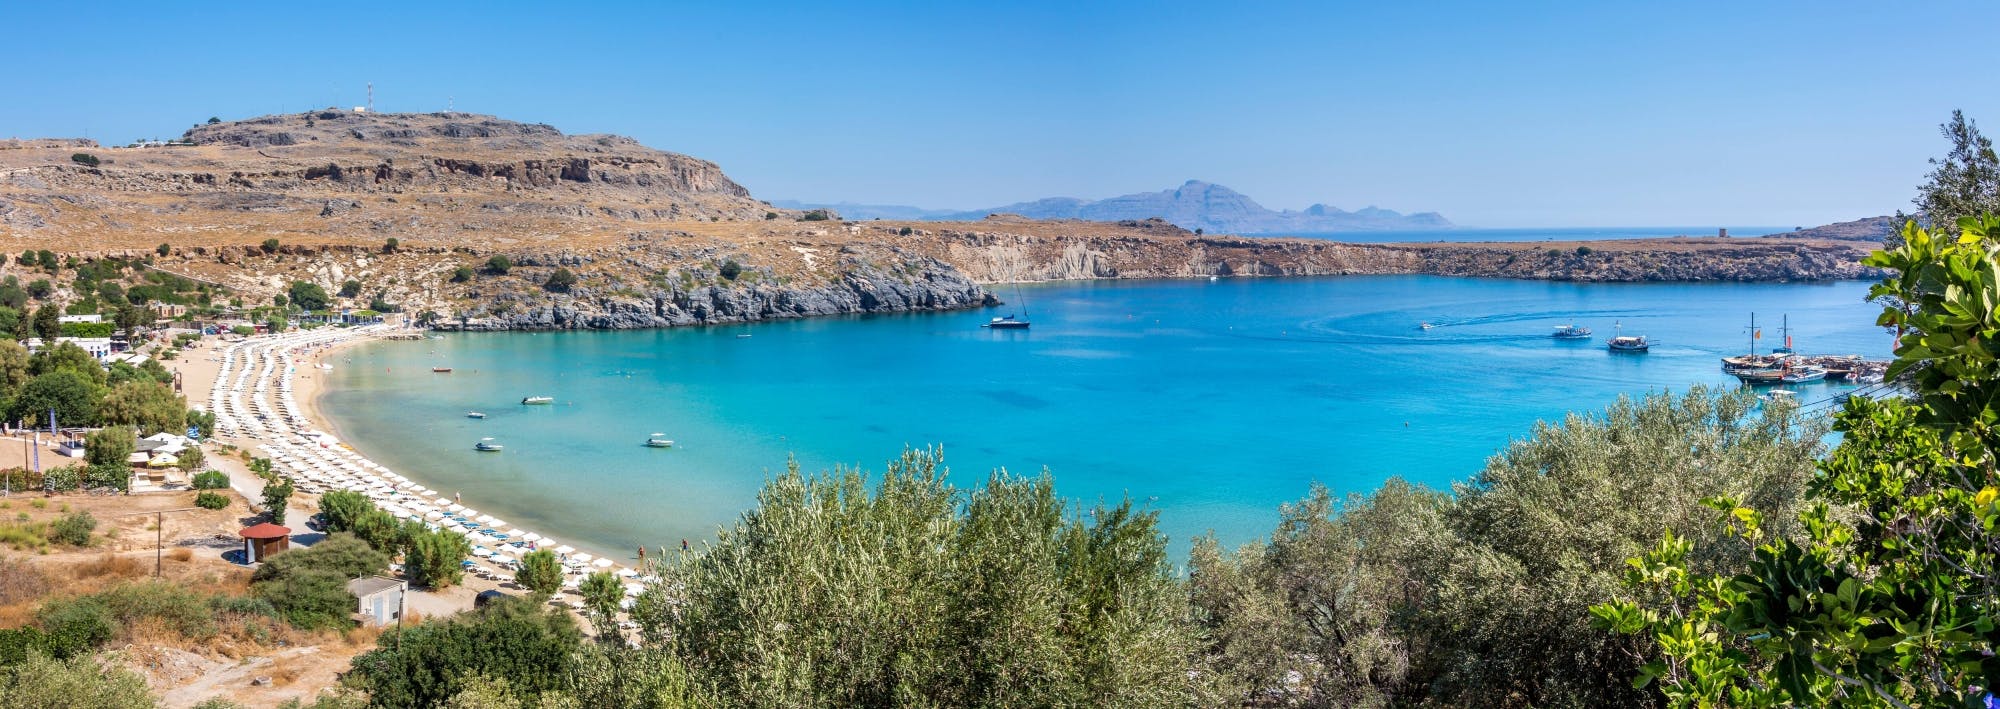 Boat Trip to Lindos with Swim Stops from Rhodes Port